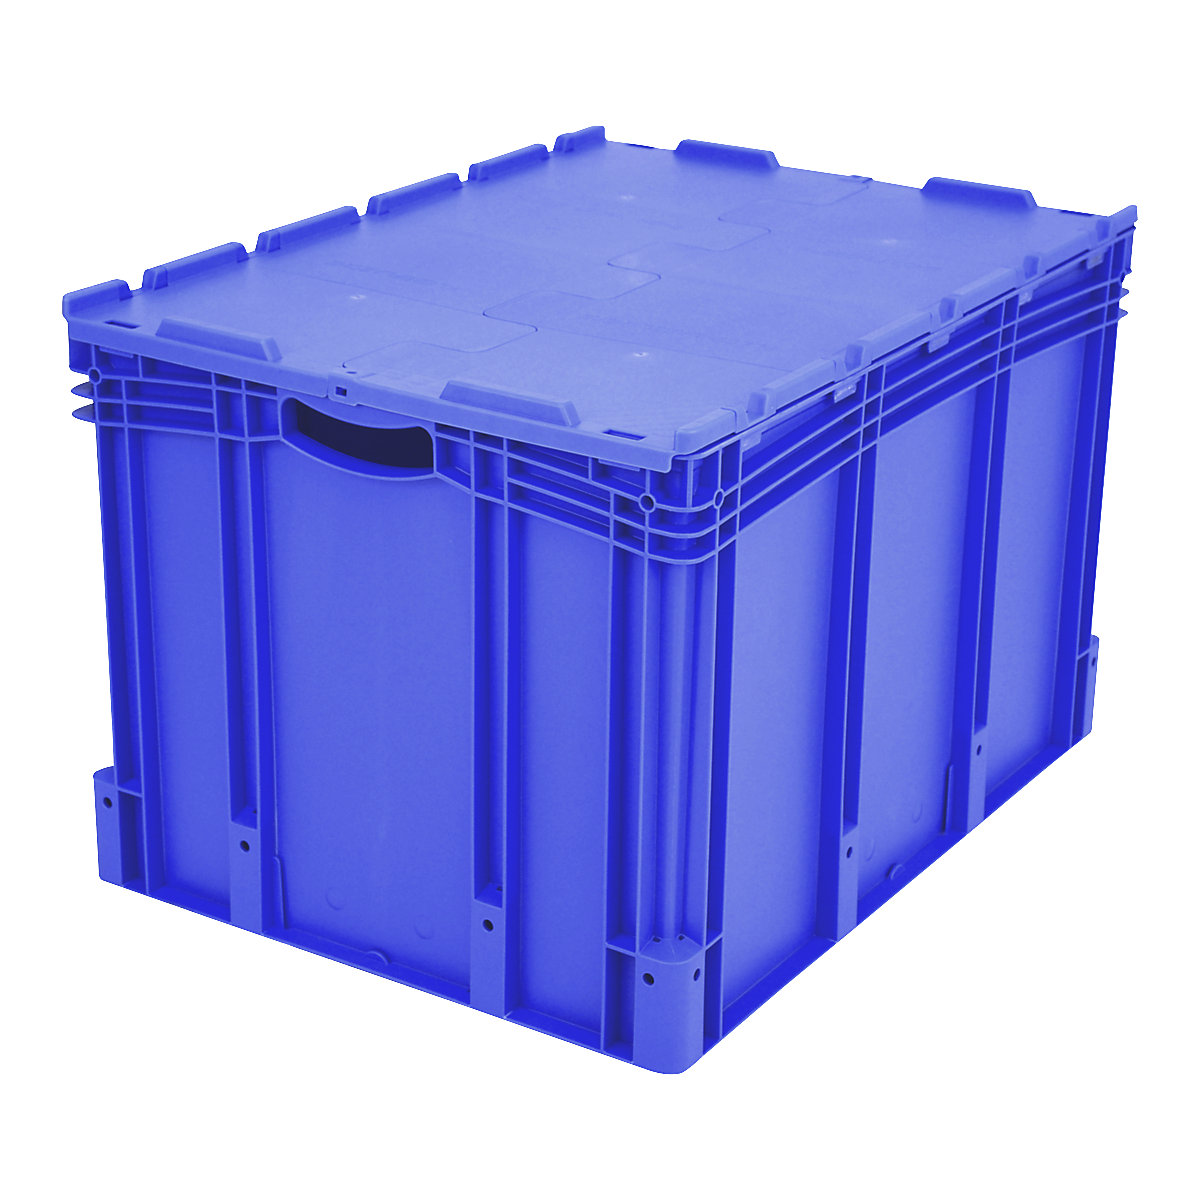 XL Euro stacking container – BITO, with 2-section hinged lid, LxWxH 800 x 600 x 538 mm-8